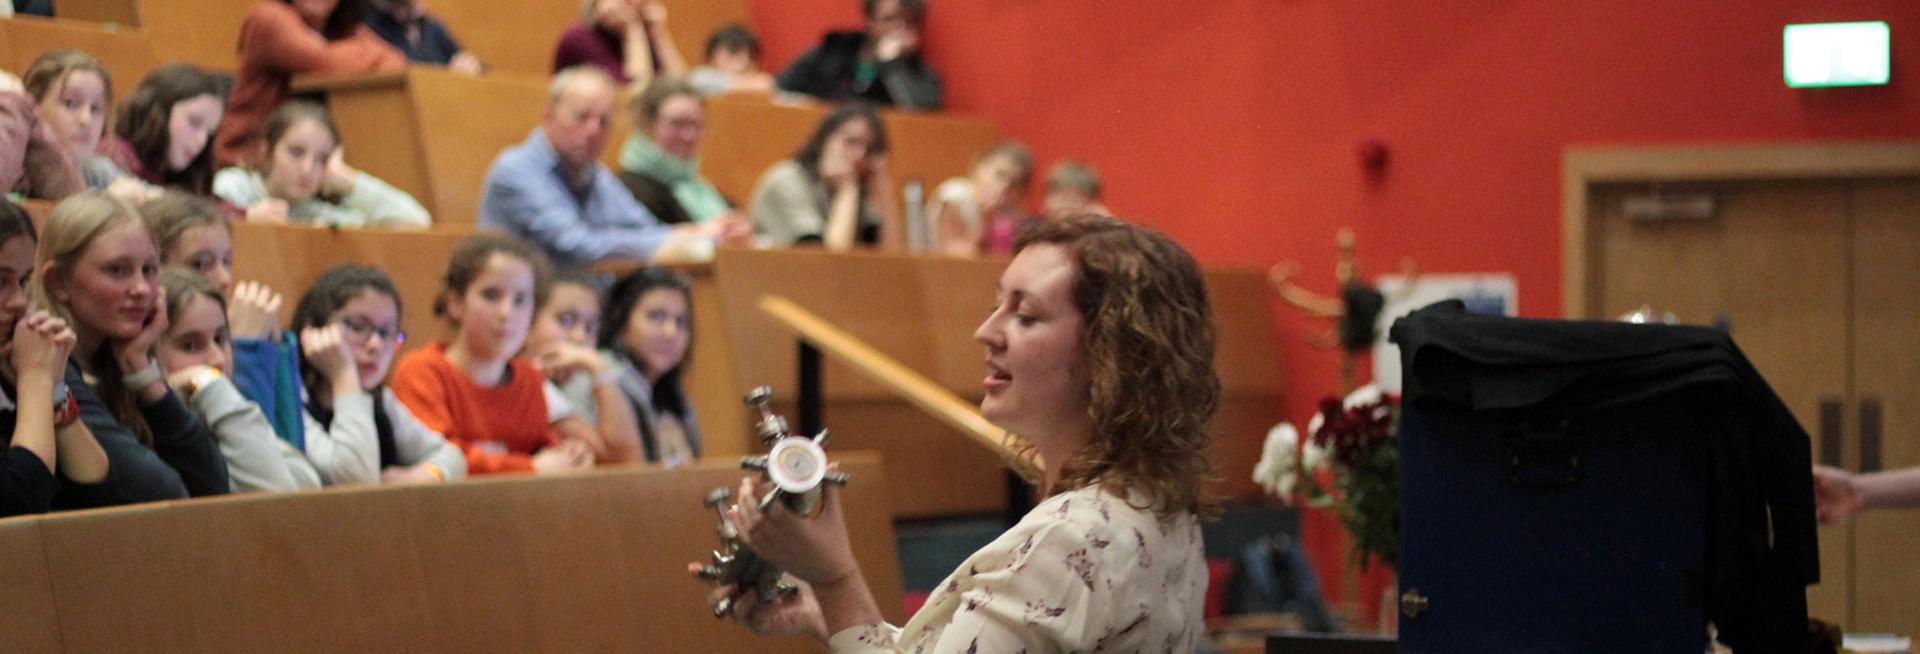 Female outreach officer holding an object talking to a lecture theatre of school students